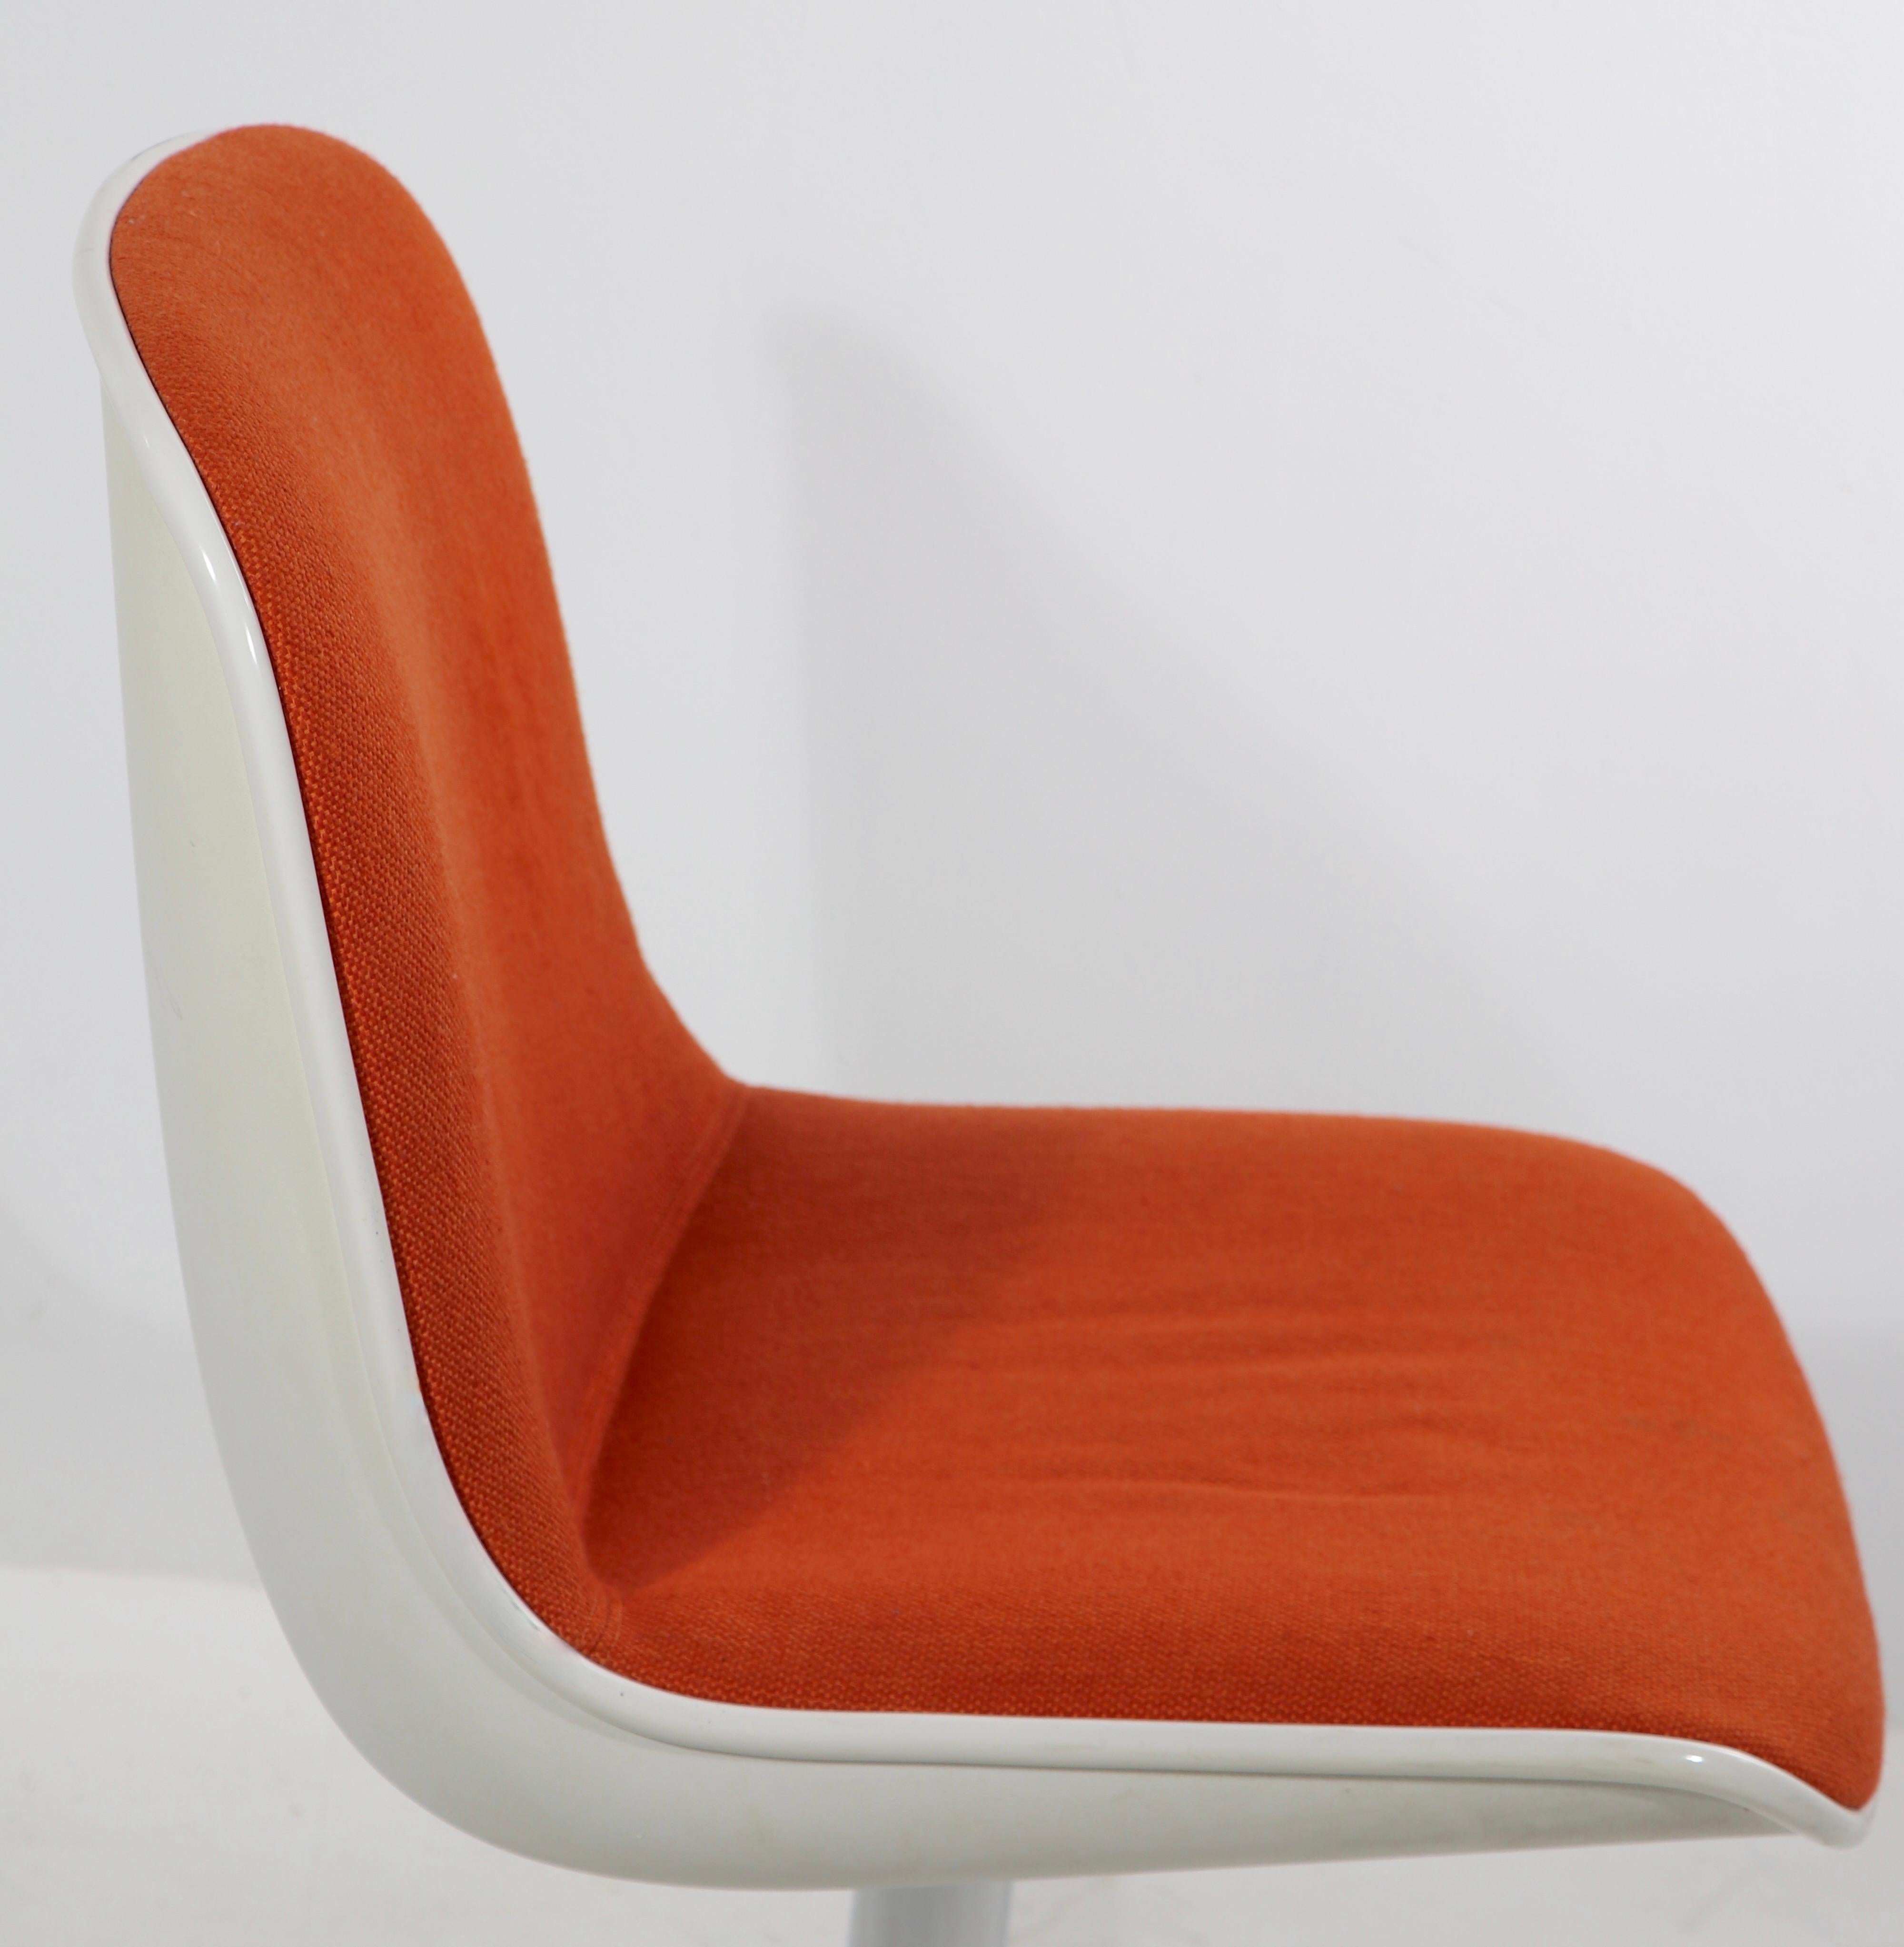 Late 20th Century Postmodern Steelcase Office Desk Dining Chair